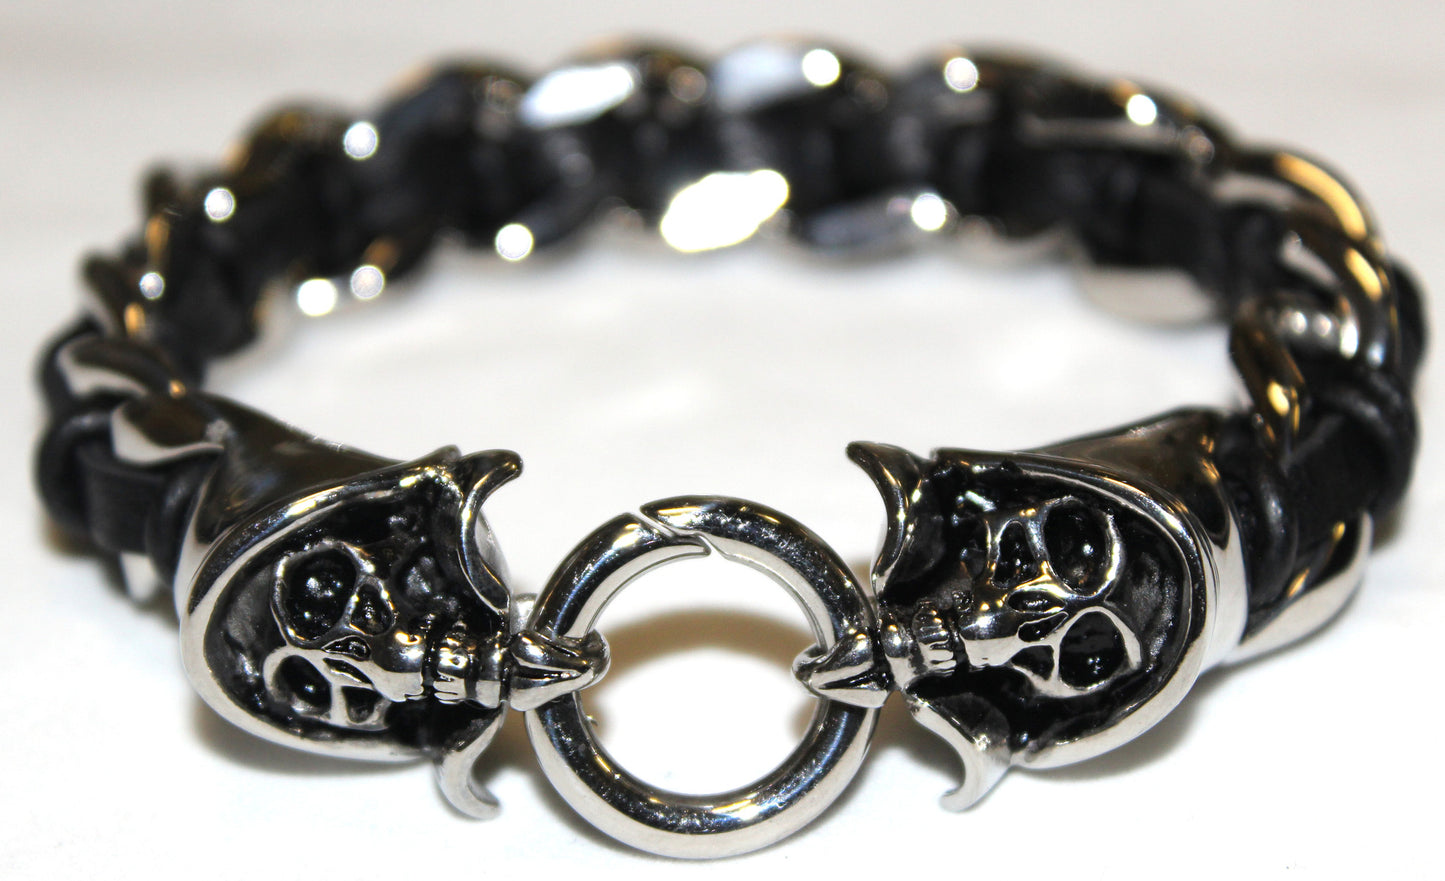 Stainless Steel Grim Reaper Leather and Chain Bracelet- UDINC0448